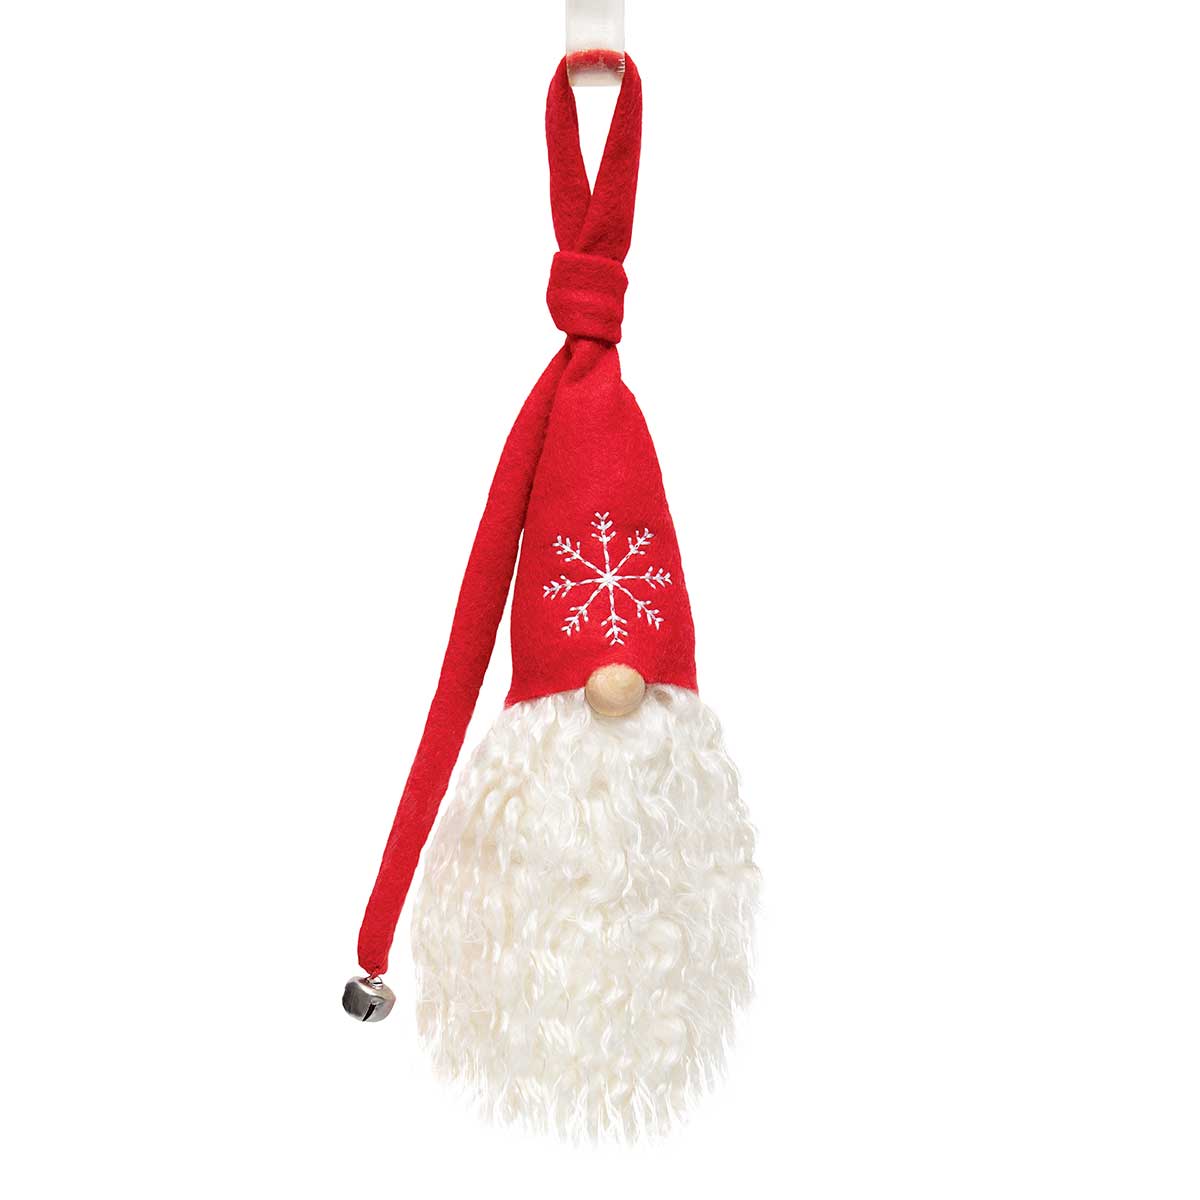 PIERRE' NOEL GNOME RED WITH JINGLE BELL, SNOWFLAKE